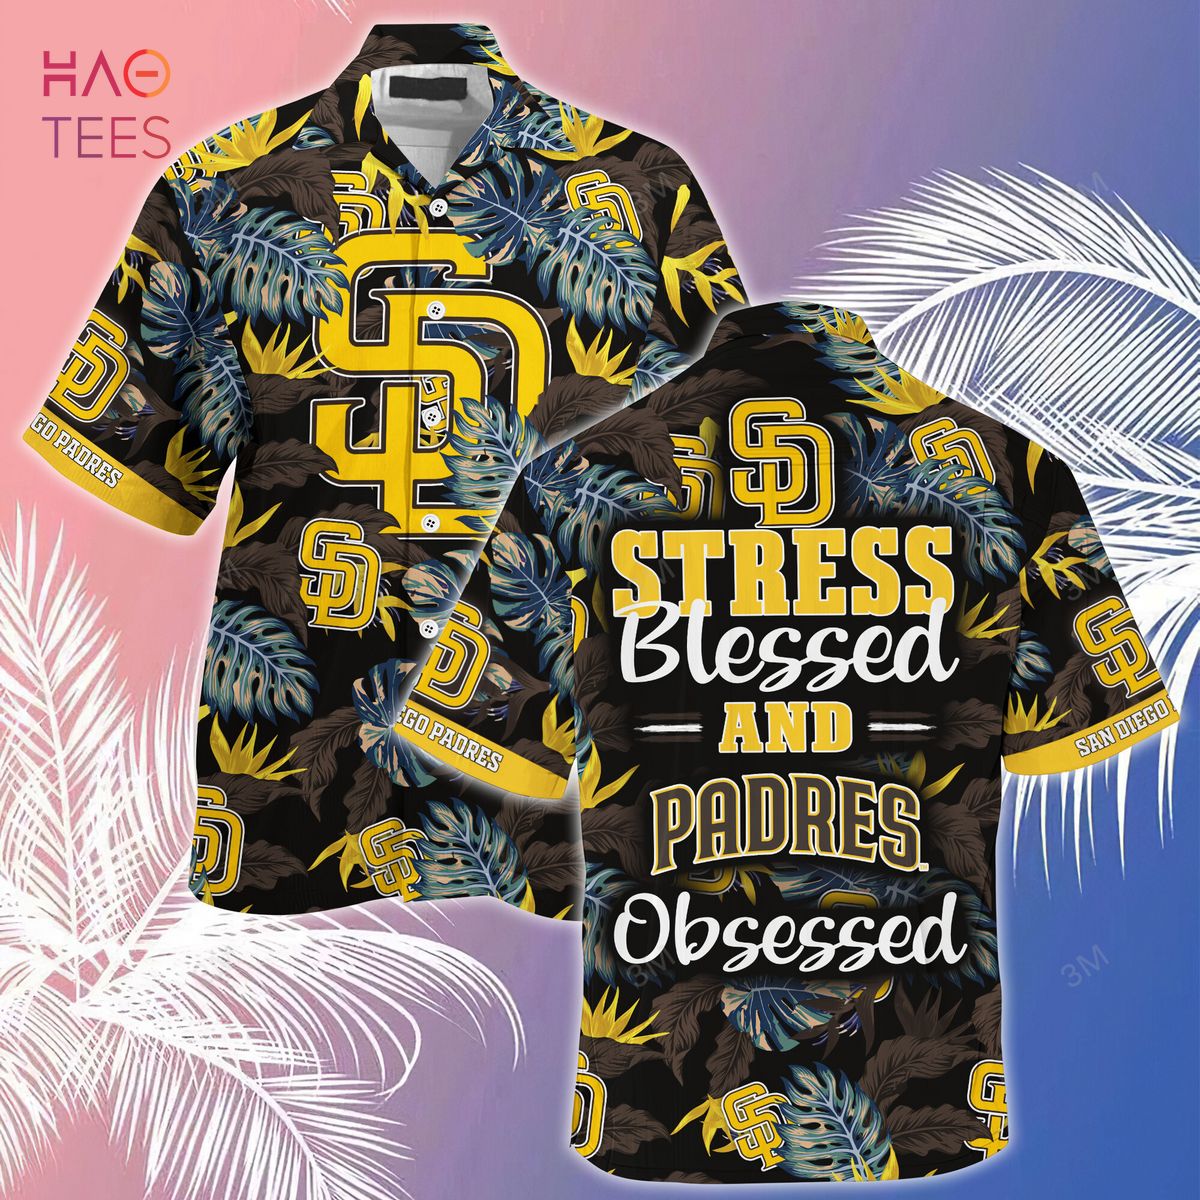 padres mother's day jersey